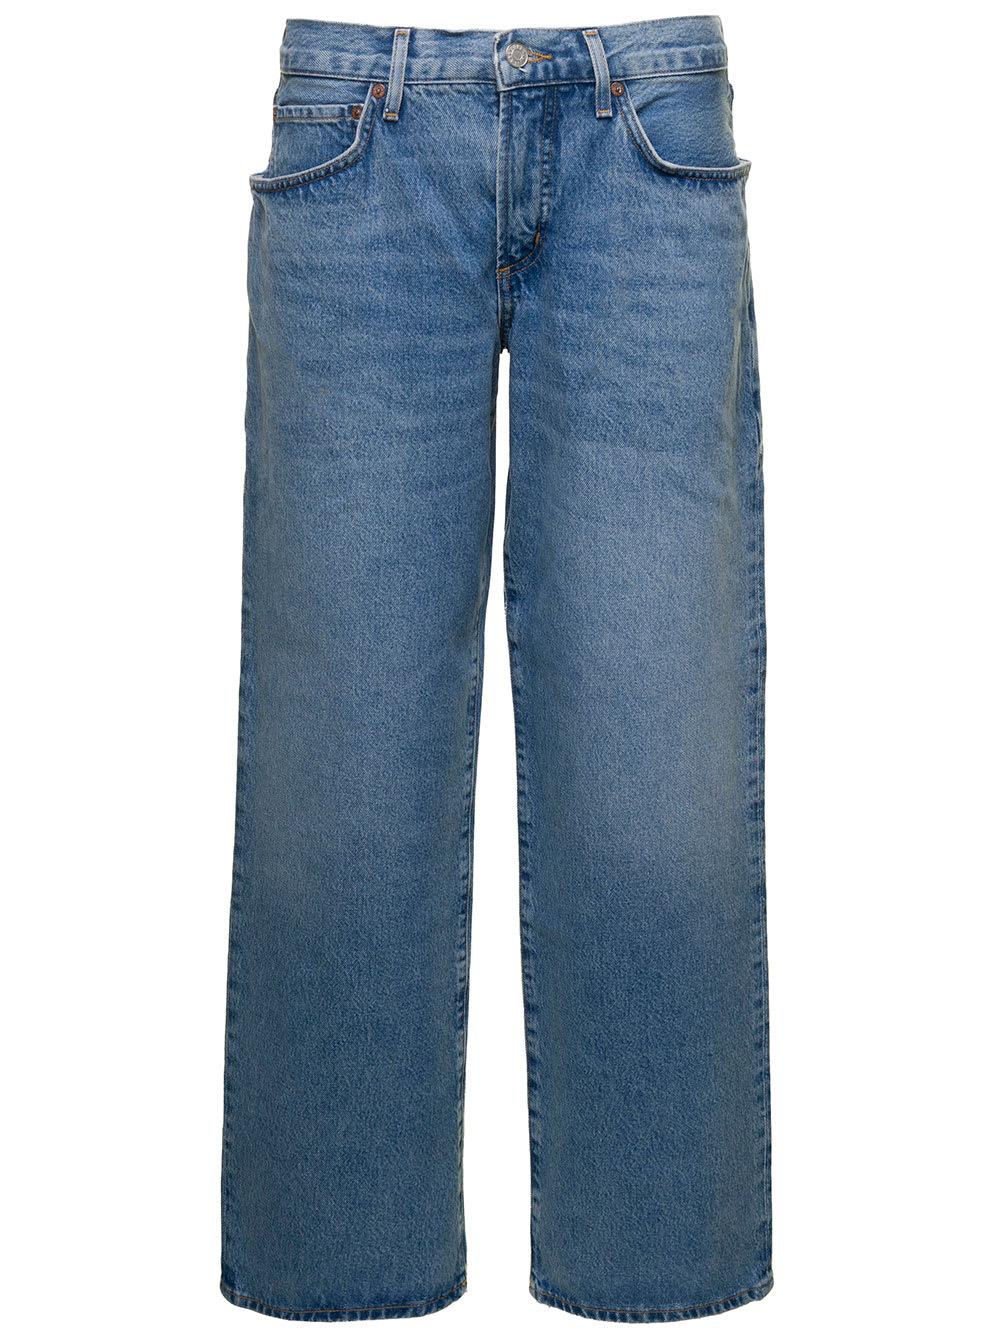 AGOLDE FUSION LIGHT BLUE 5-POCKET STYLE WIDE JEANS IN COTTON DENIM WOMAN